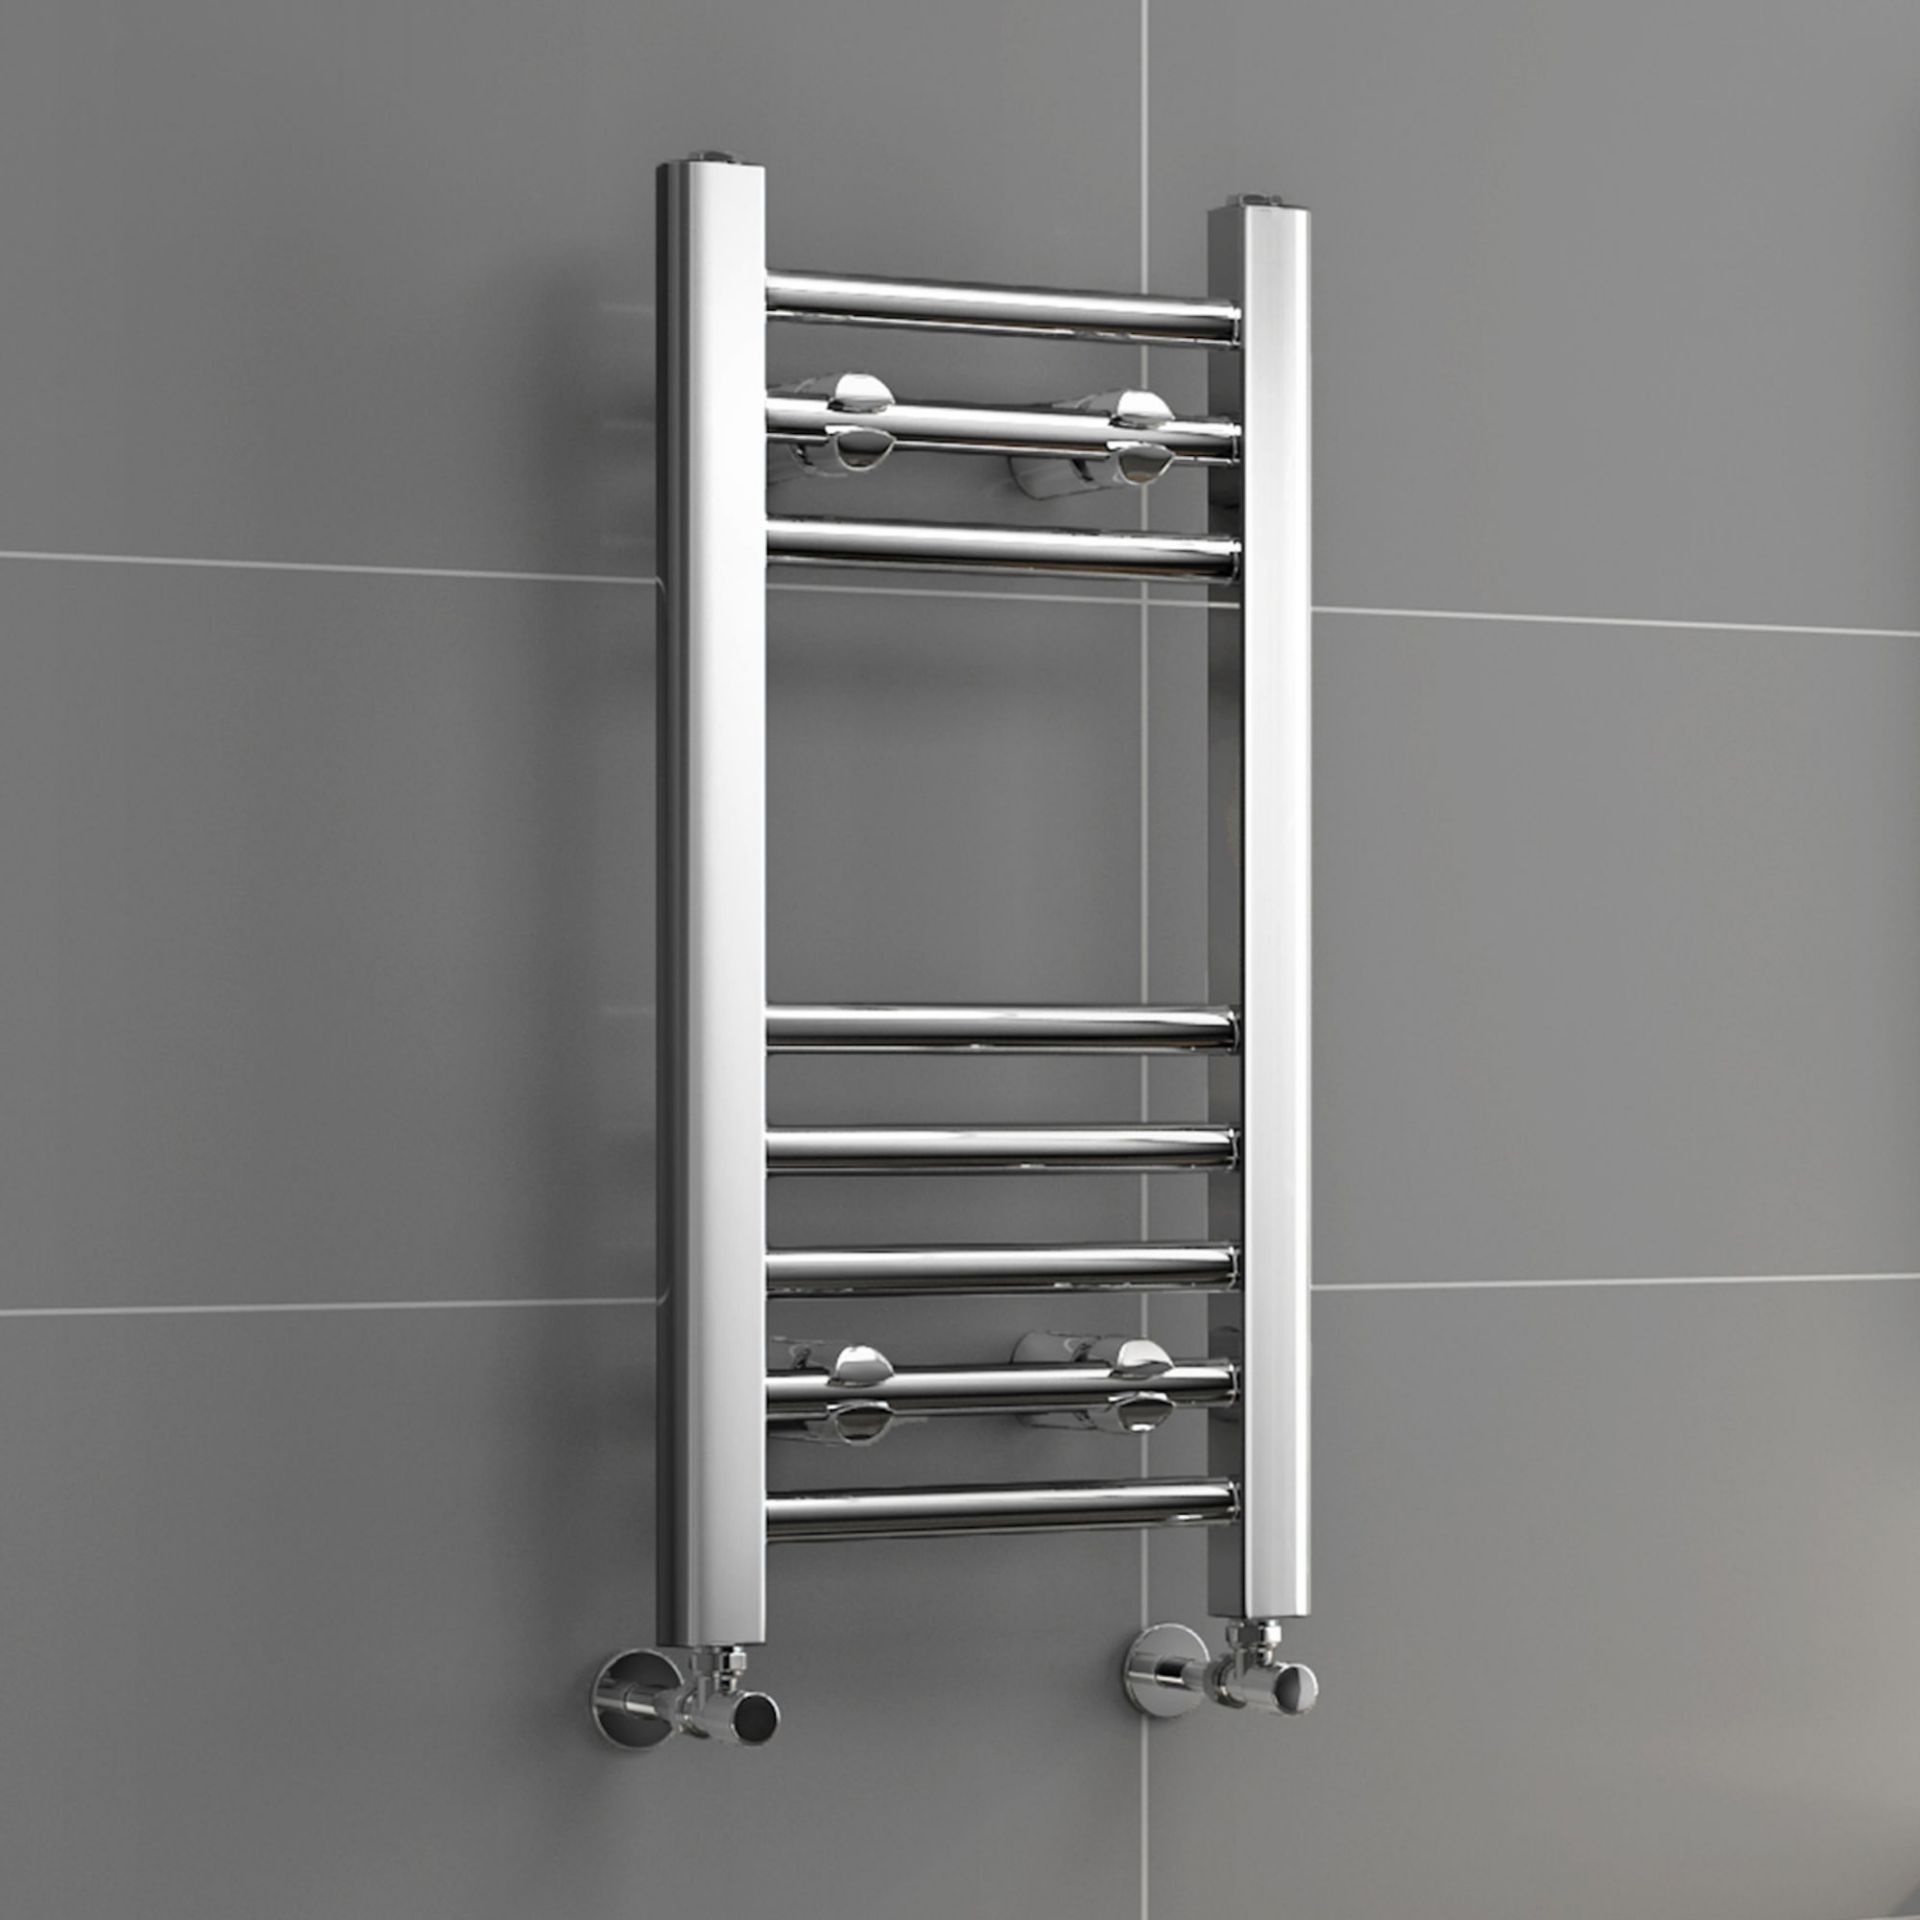 (ED160) 600x300mm - 20mm Tubes - Chrome Heated Straight Rail Ladder Towel Rail. Low carbon steel - Image 3 of 3